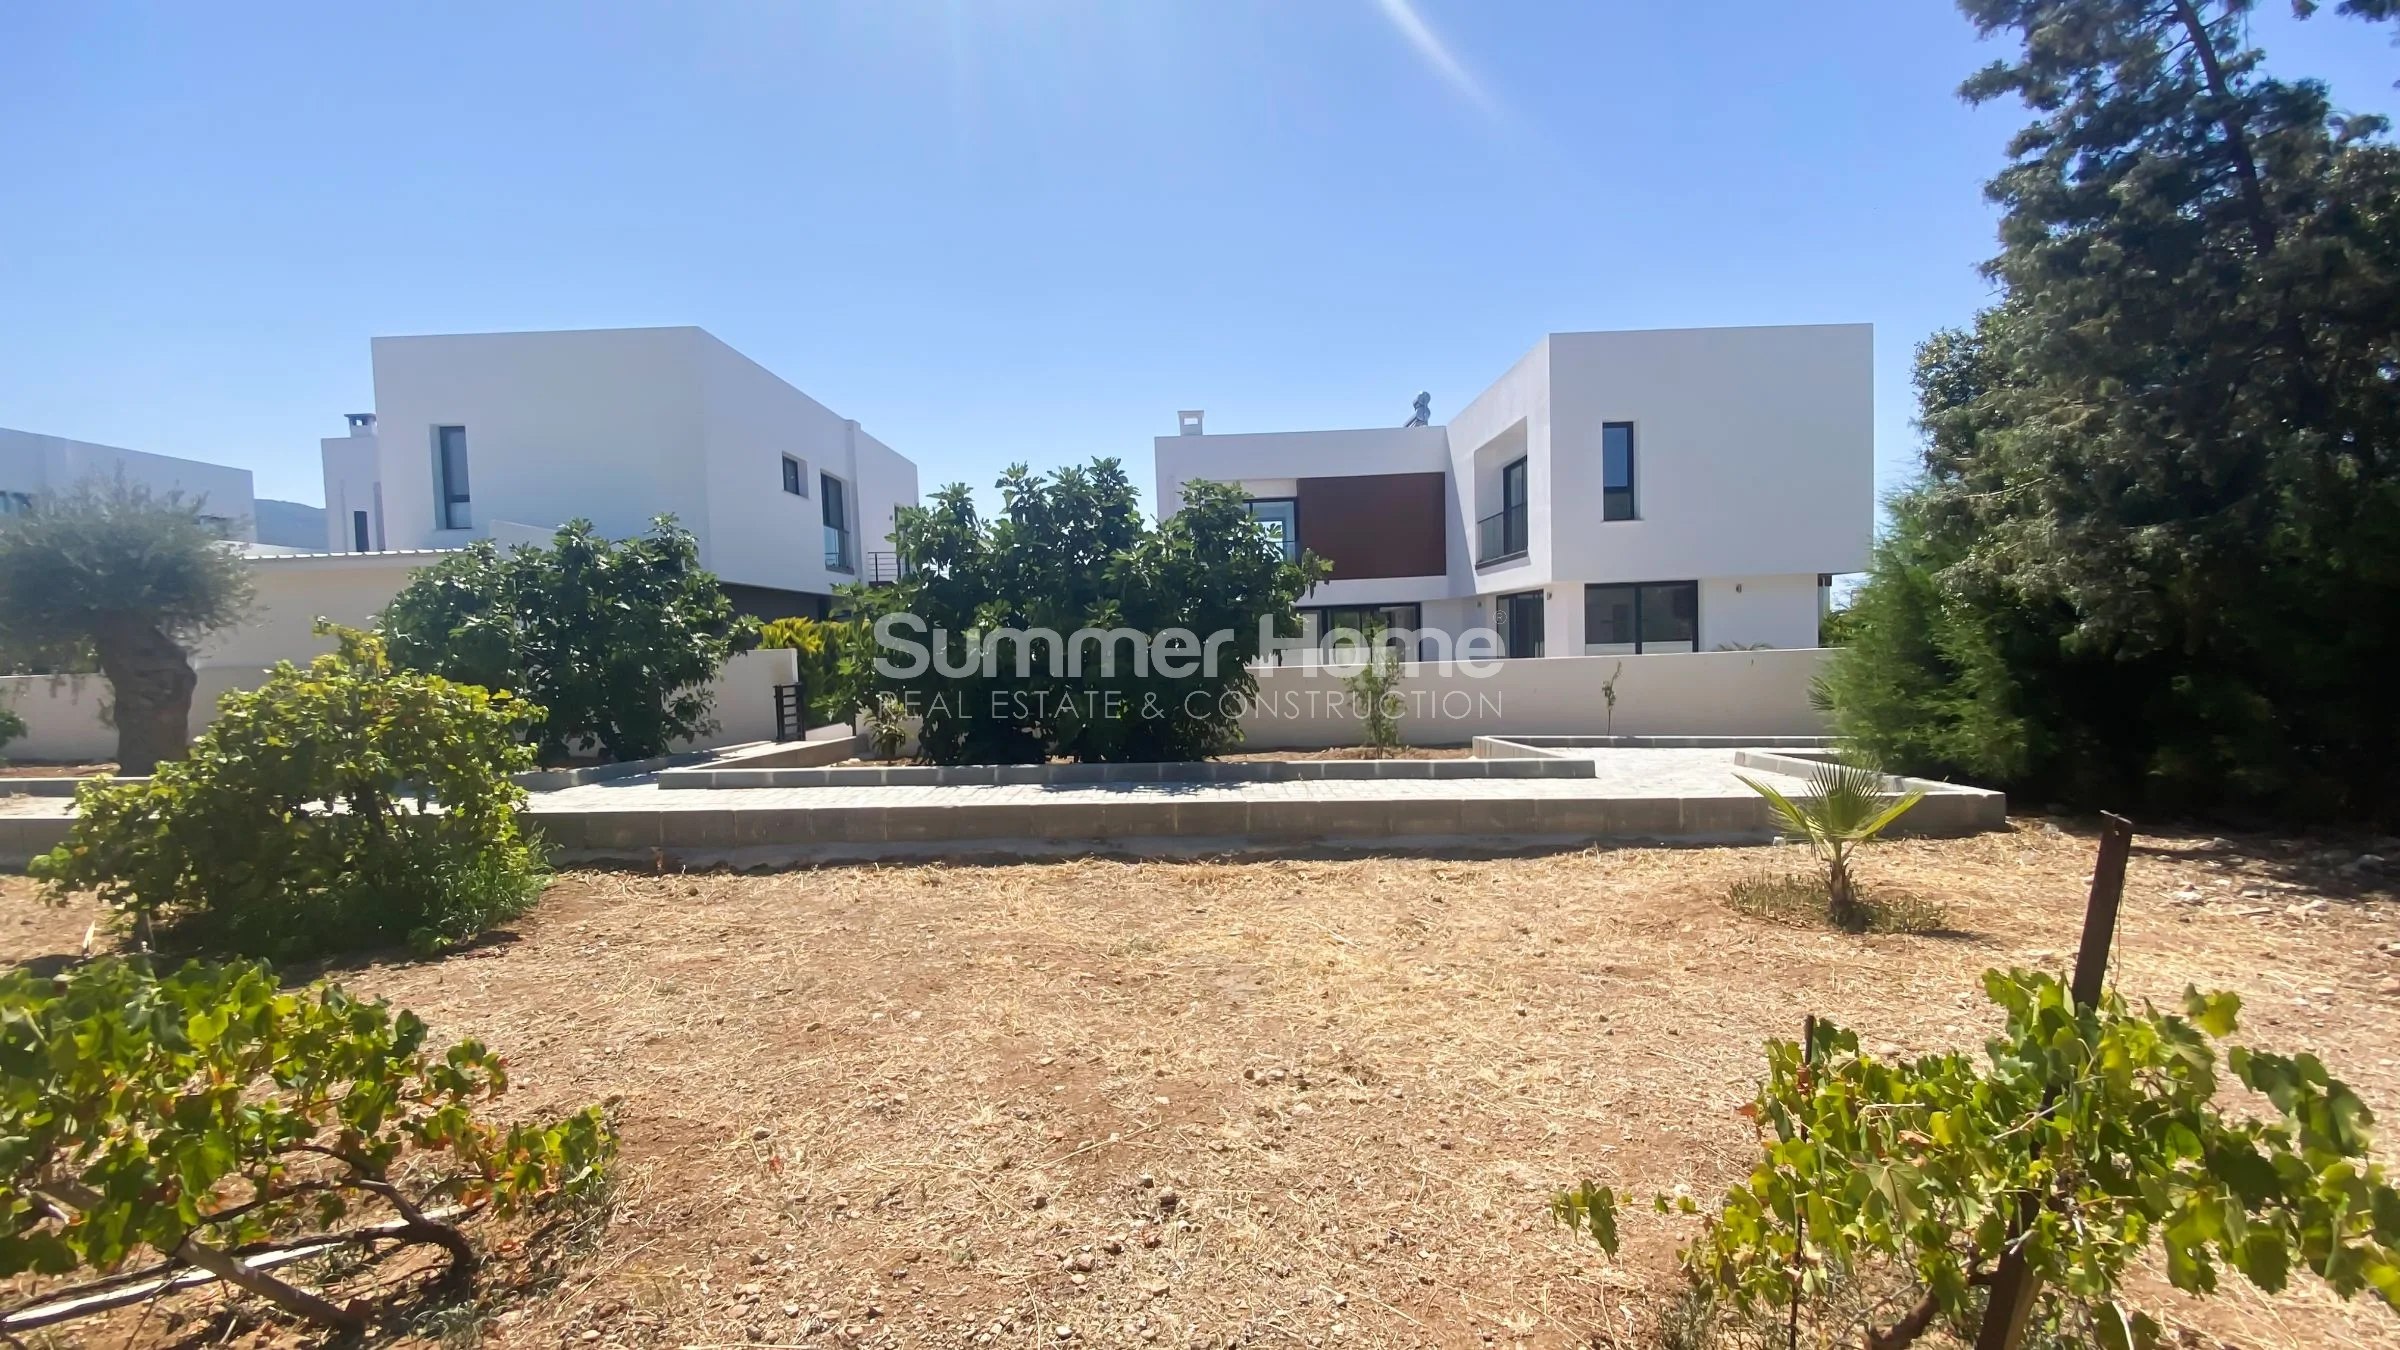 Recently completed well-located villas in Kyrenia, Cyprus Facilities - 24